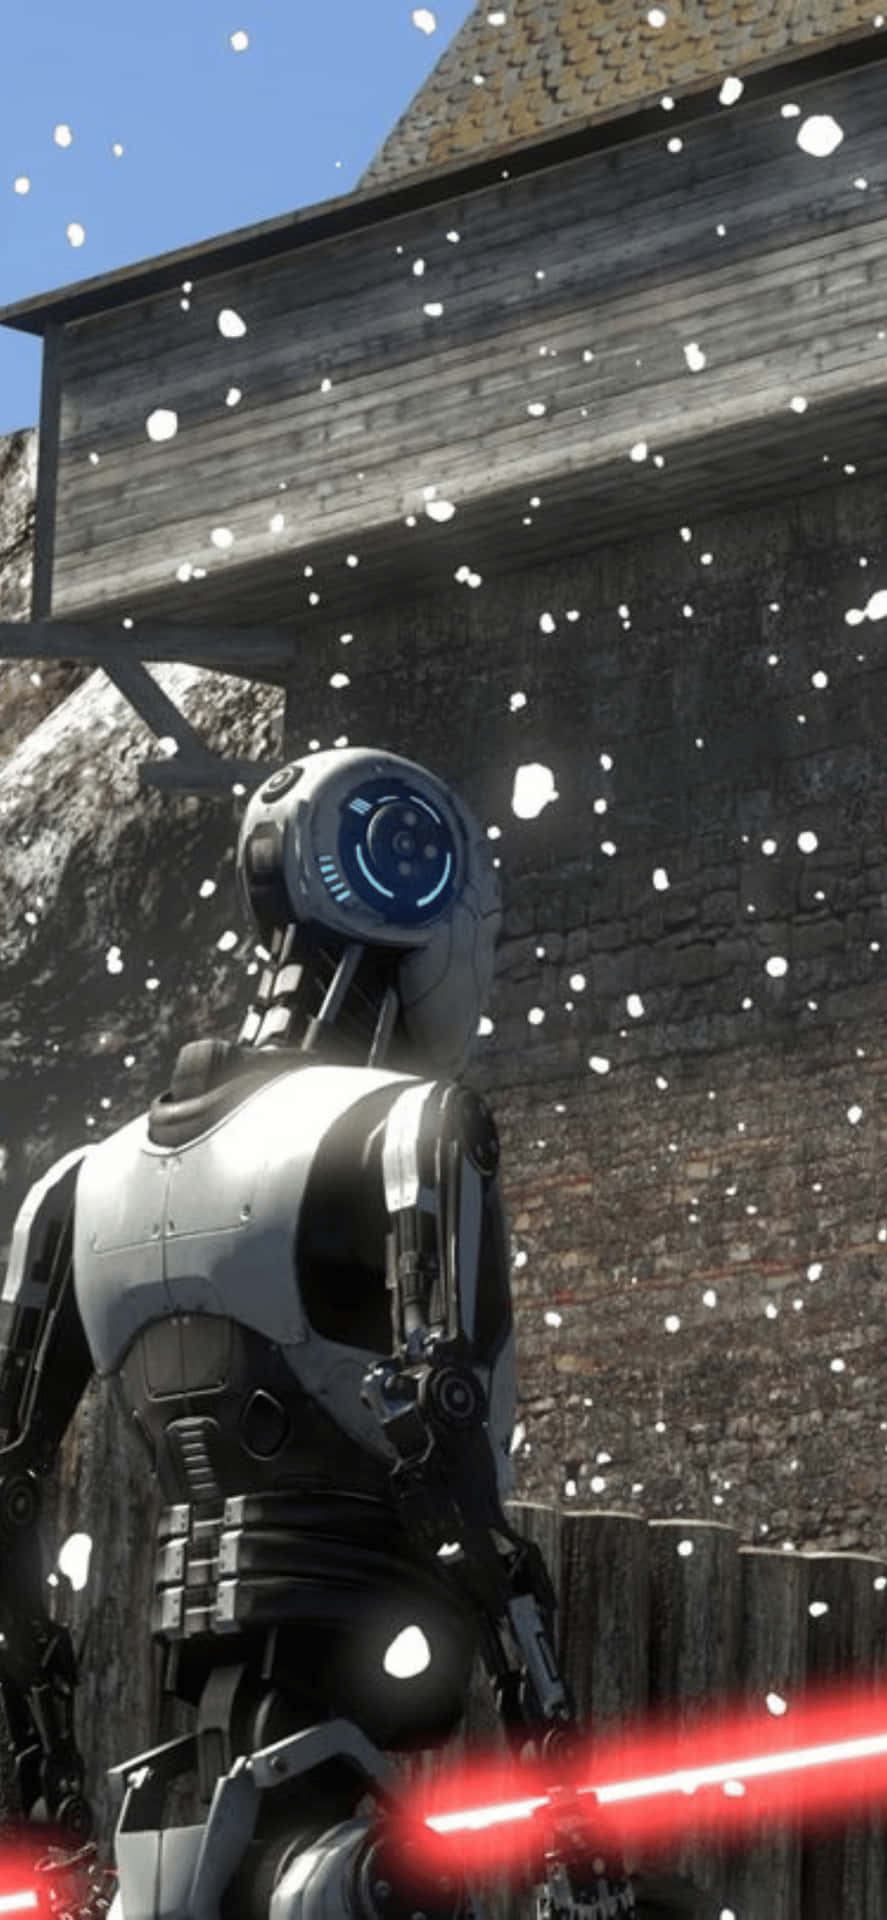 a star wars robot is standing in the snow